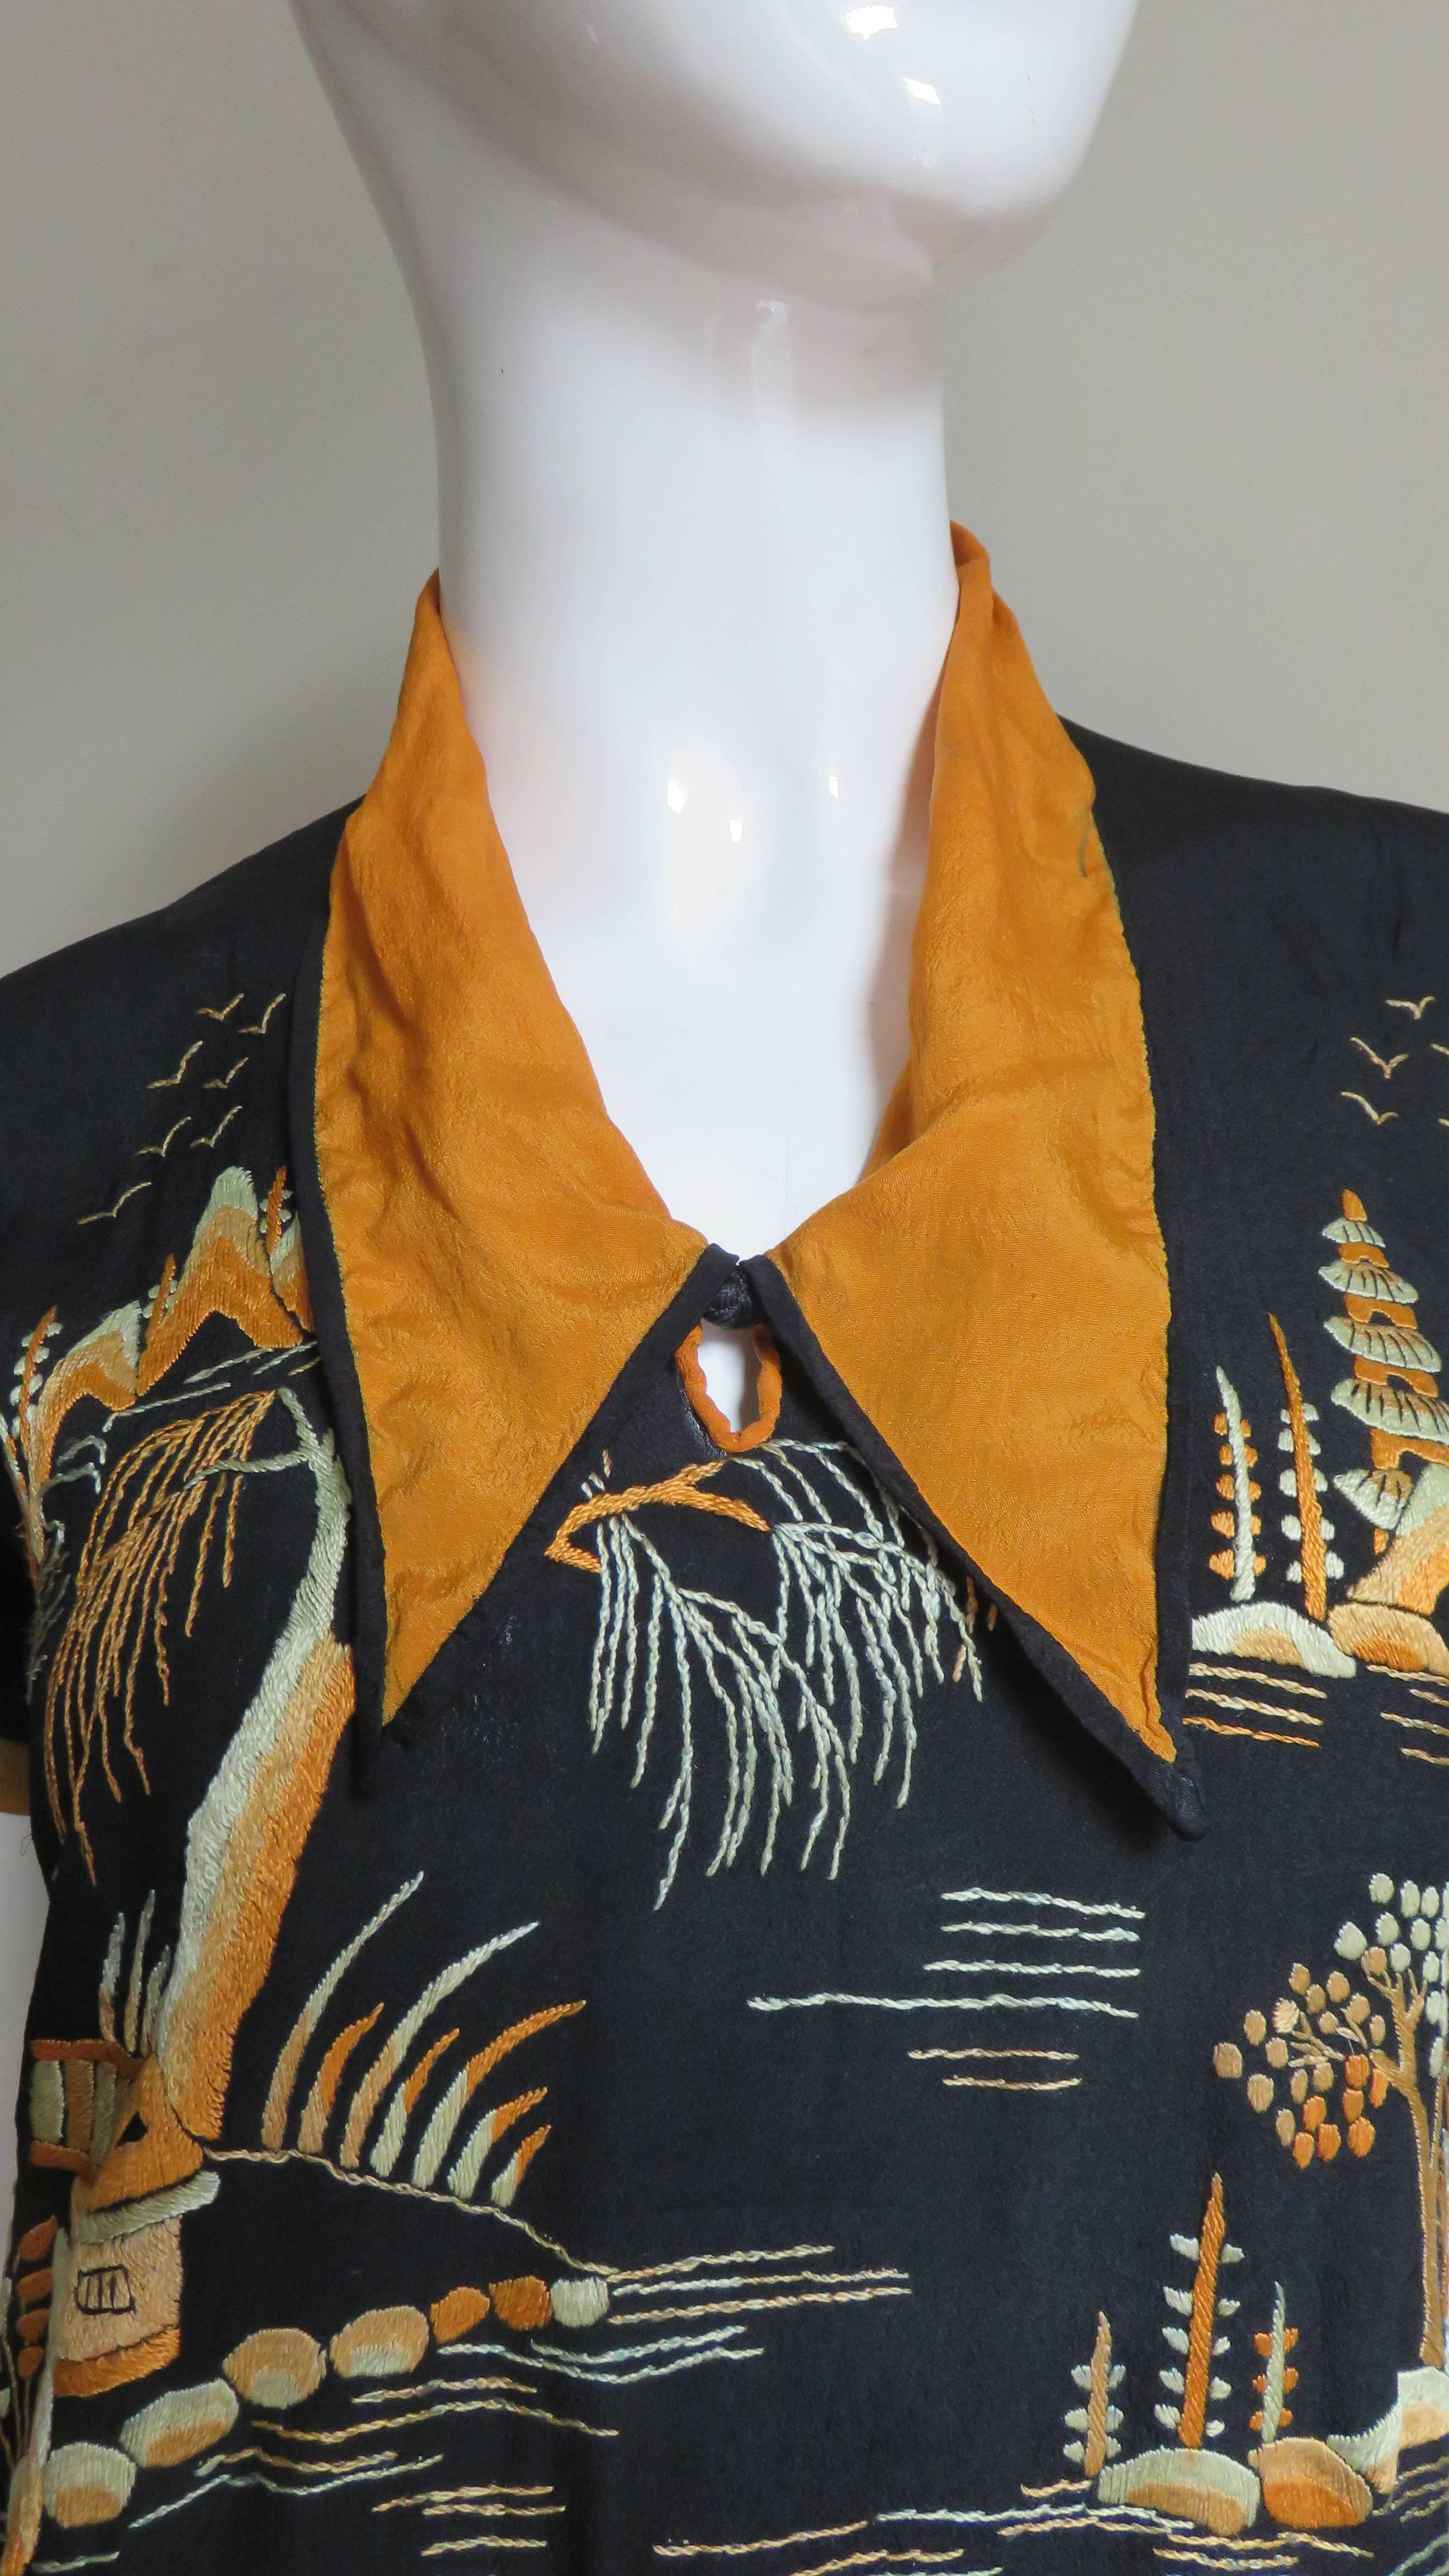 A pretty Asian embroidered black blouse with orange trim and collar.  It is elaborately embroider on the front with mountains, trees, pagodas.  It has a pointed shirt collar with a keyhole opening below it closing with a delicate woven frog.  The